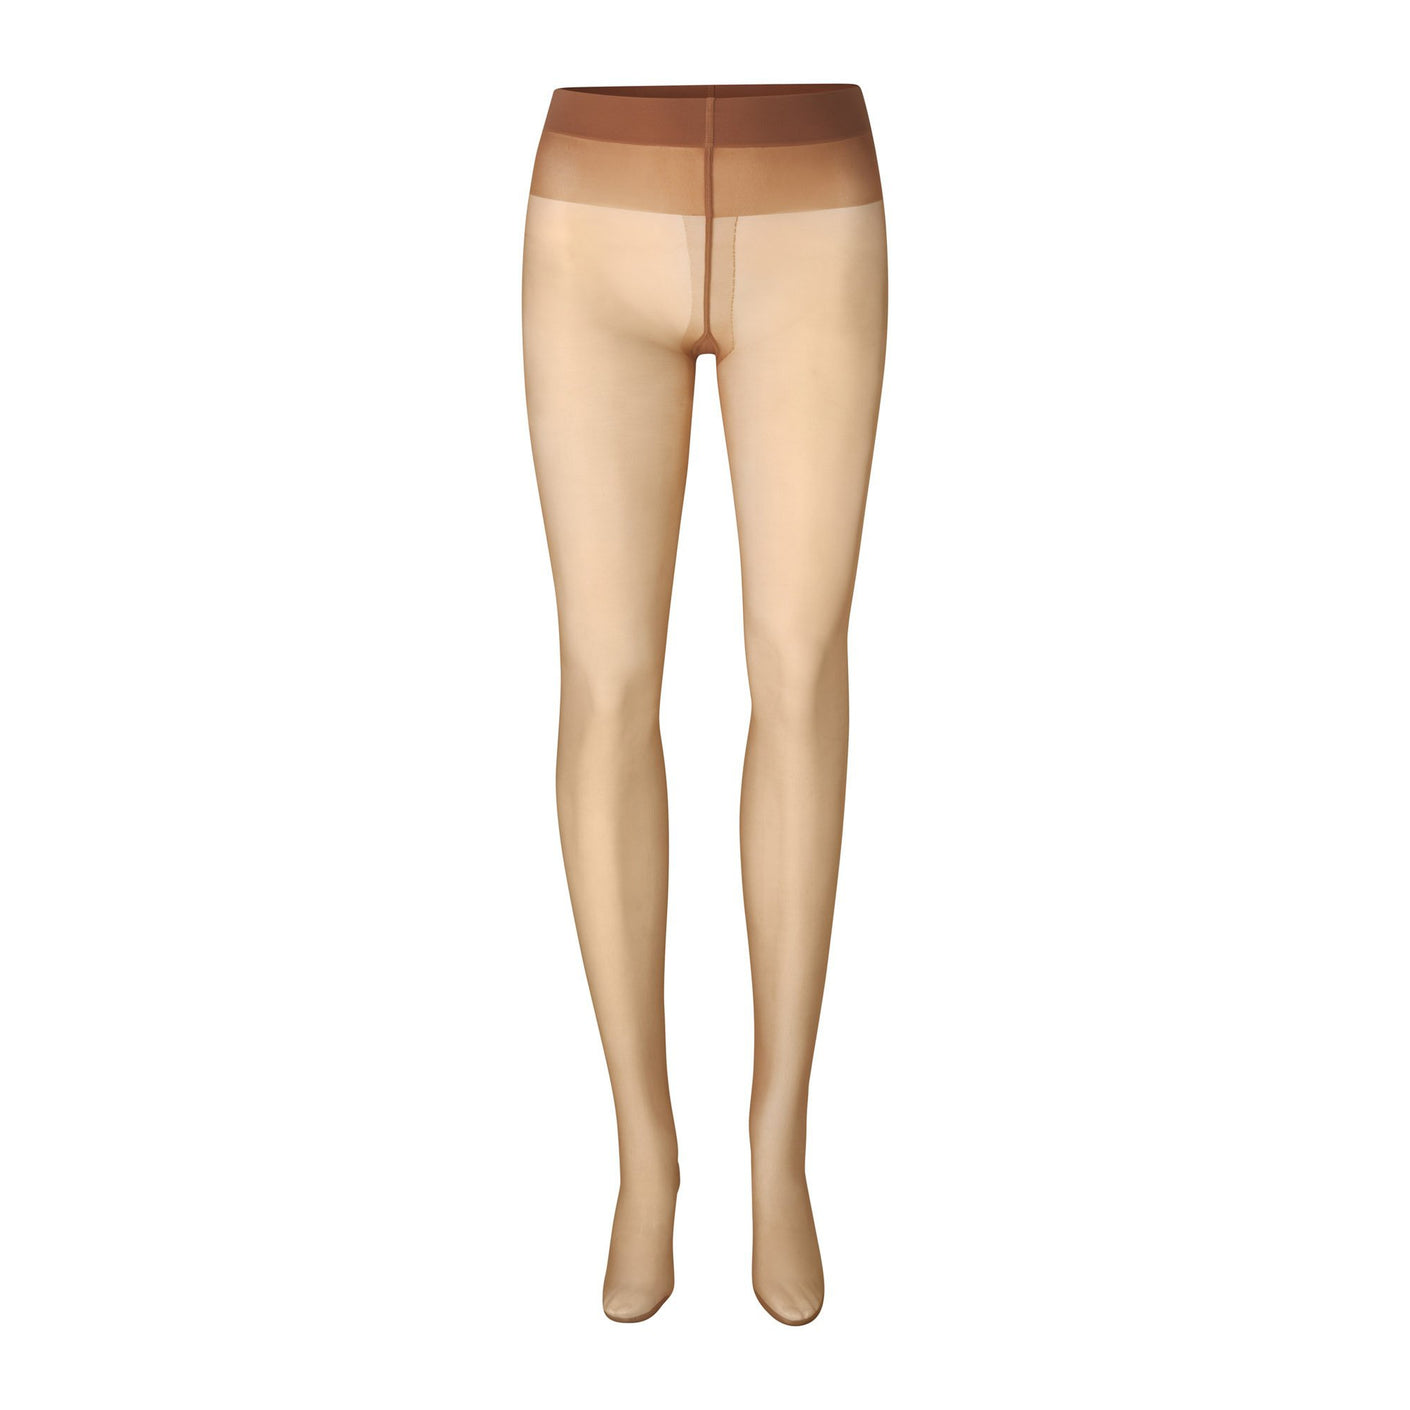 Women's Shaping Tights in Nude, Black, & Grey